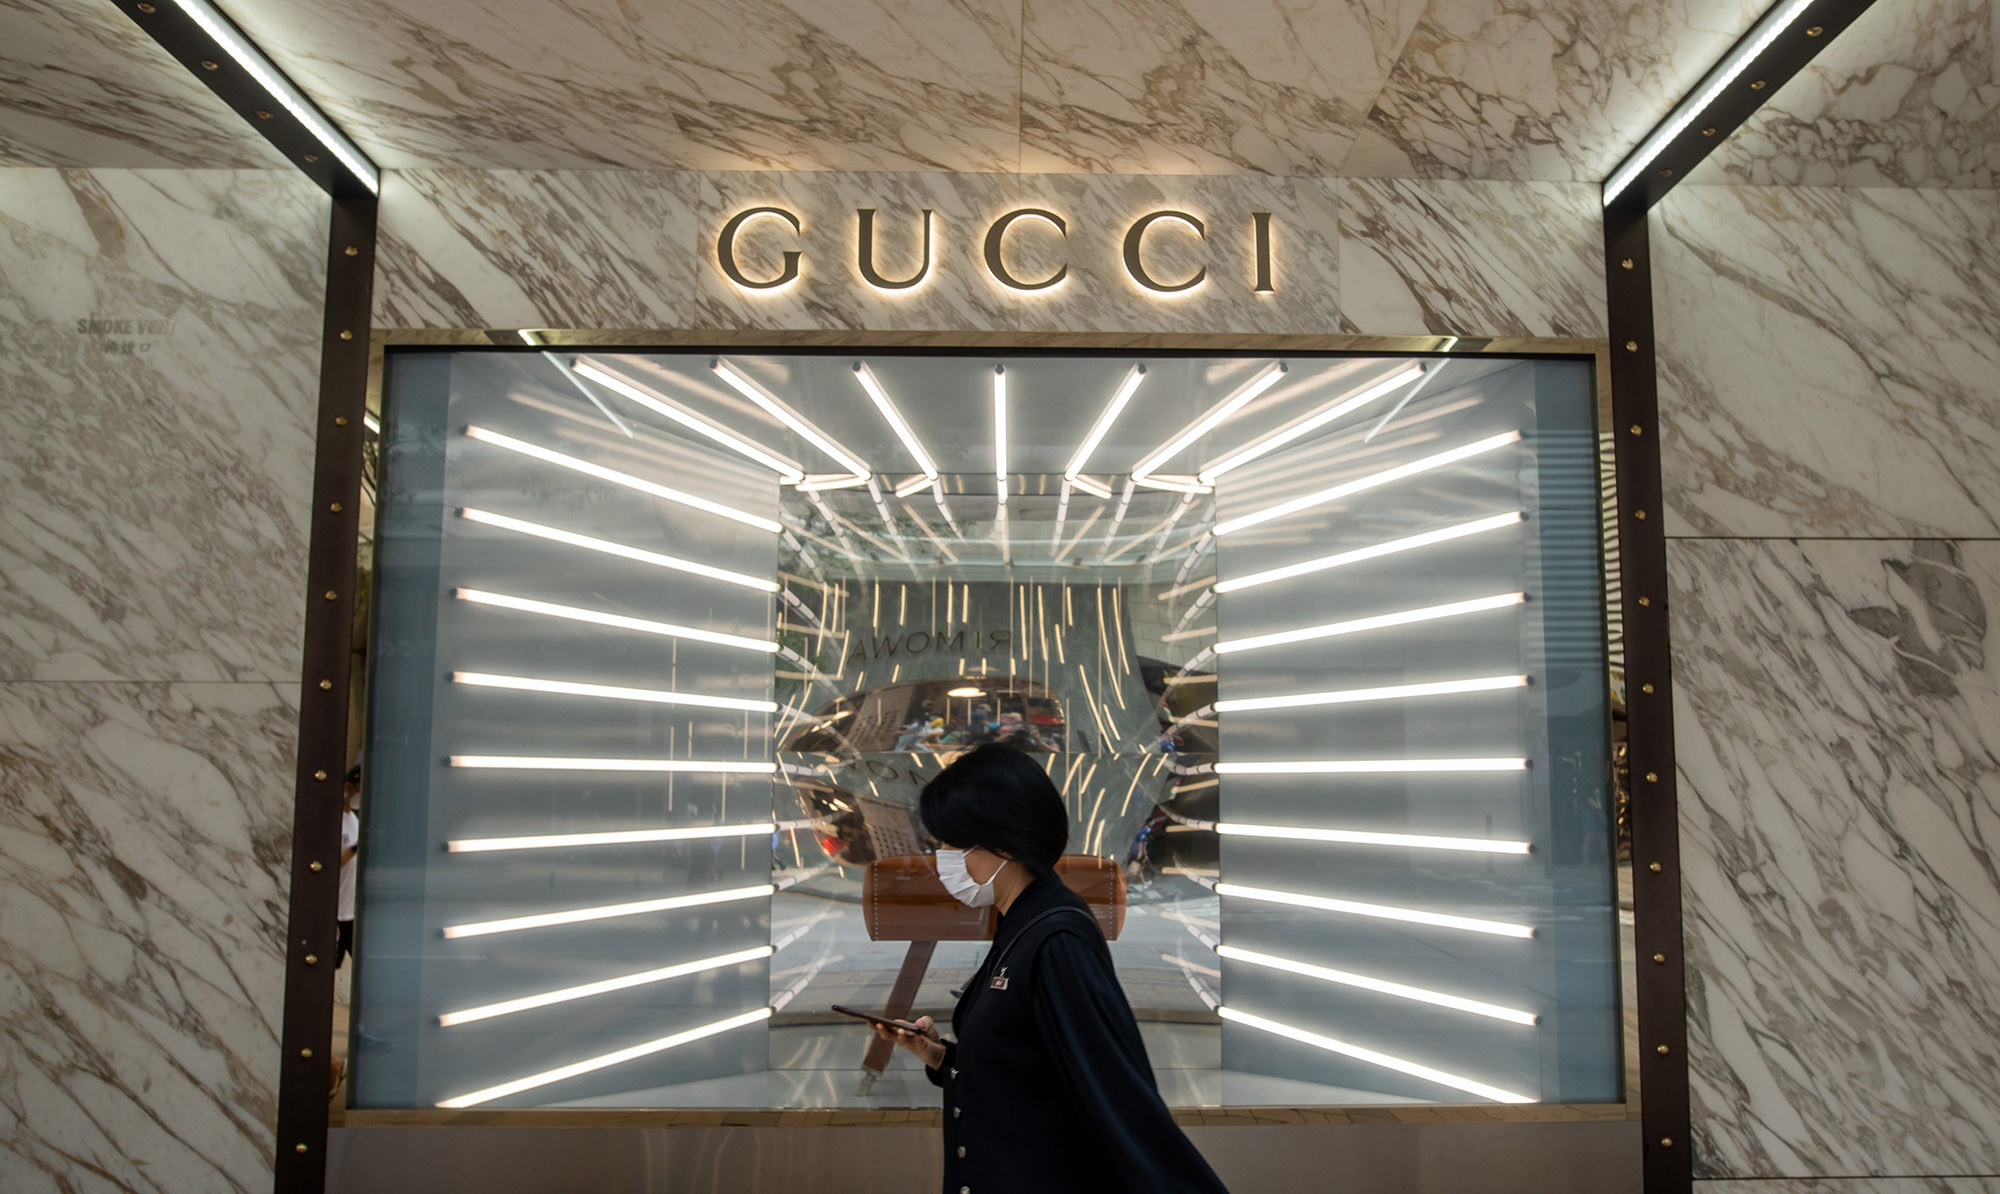 Gucci Cyber Monday 2022: What to buy in the Gucci sale